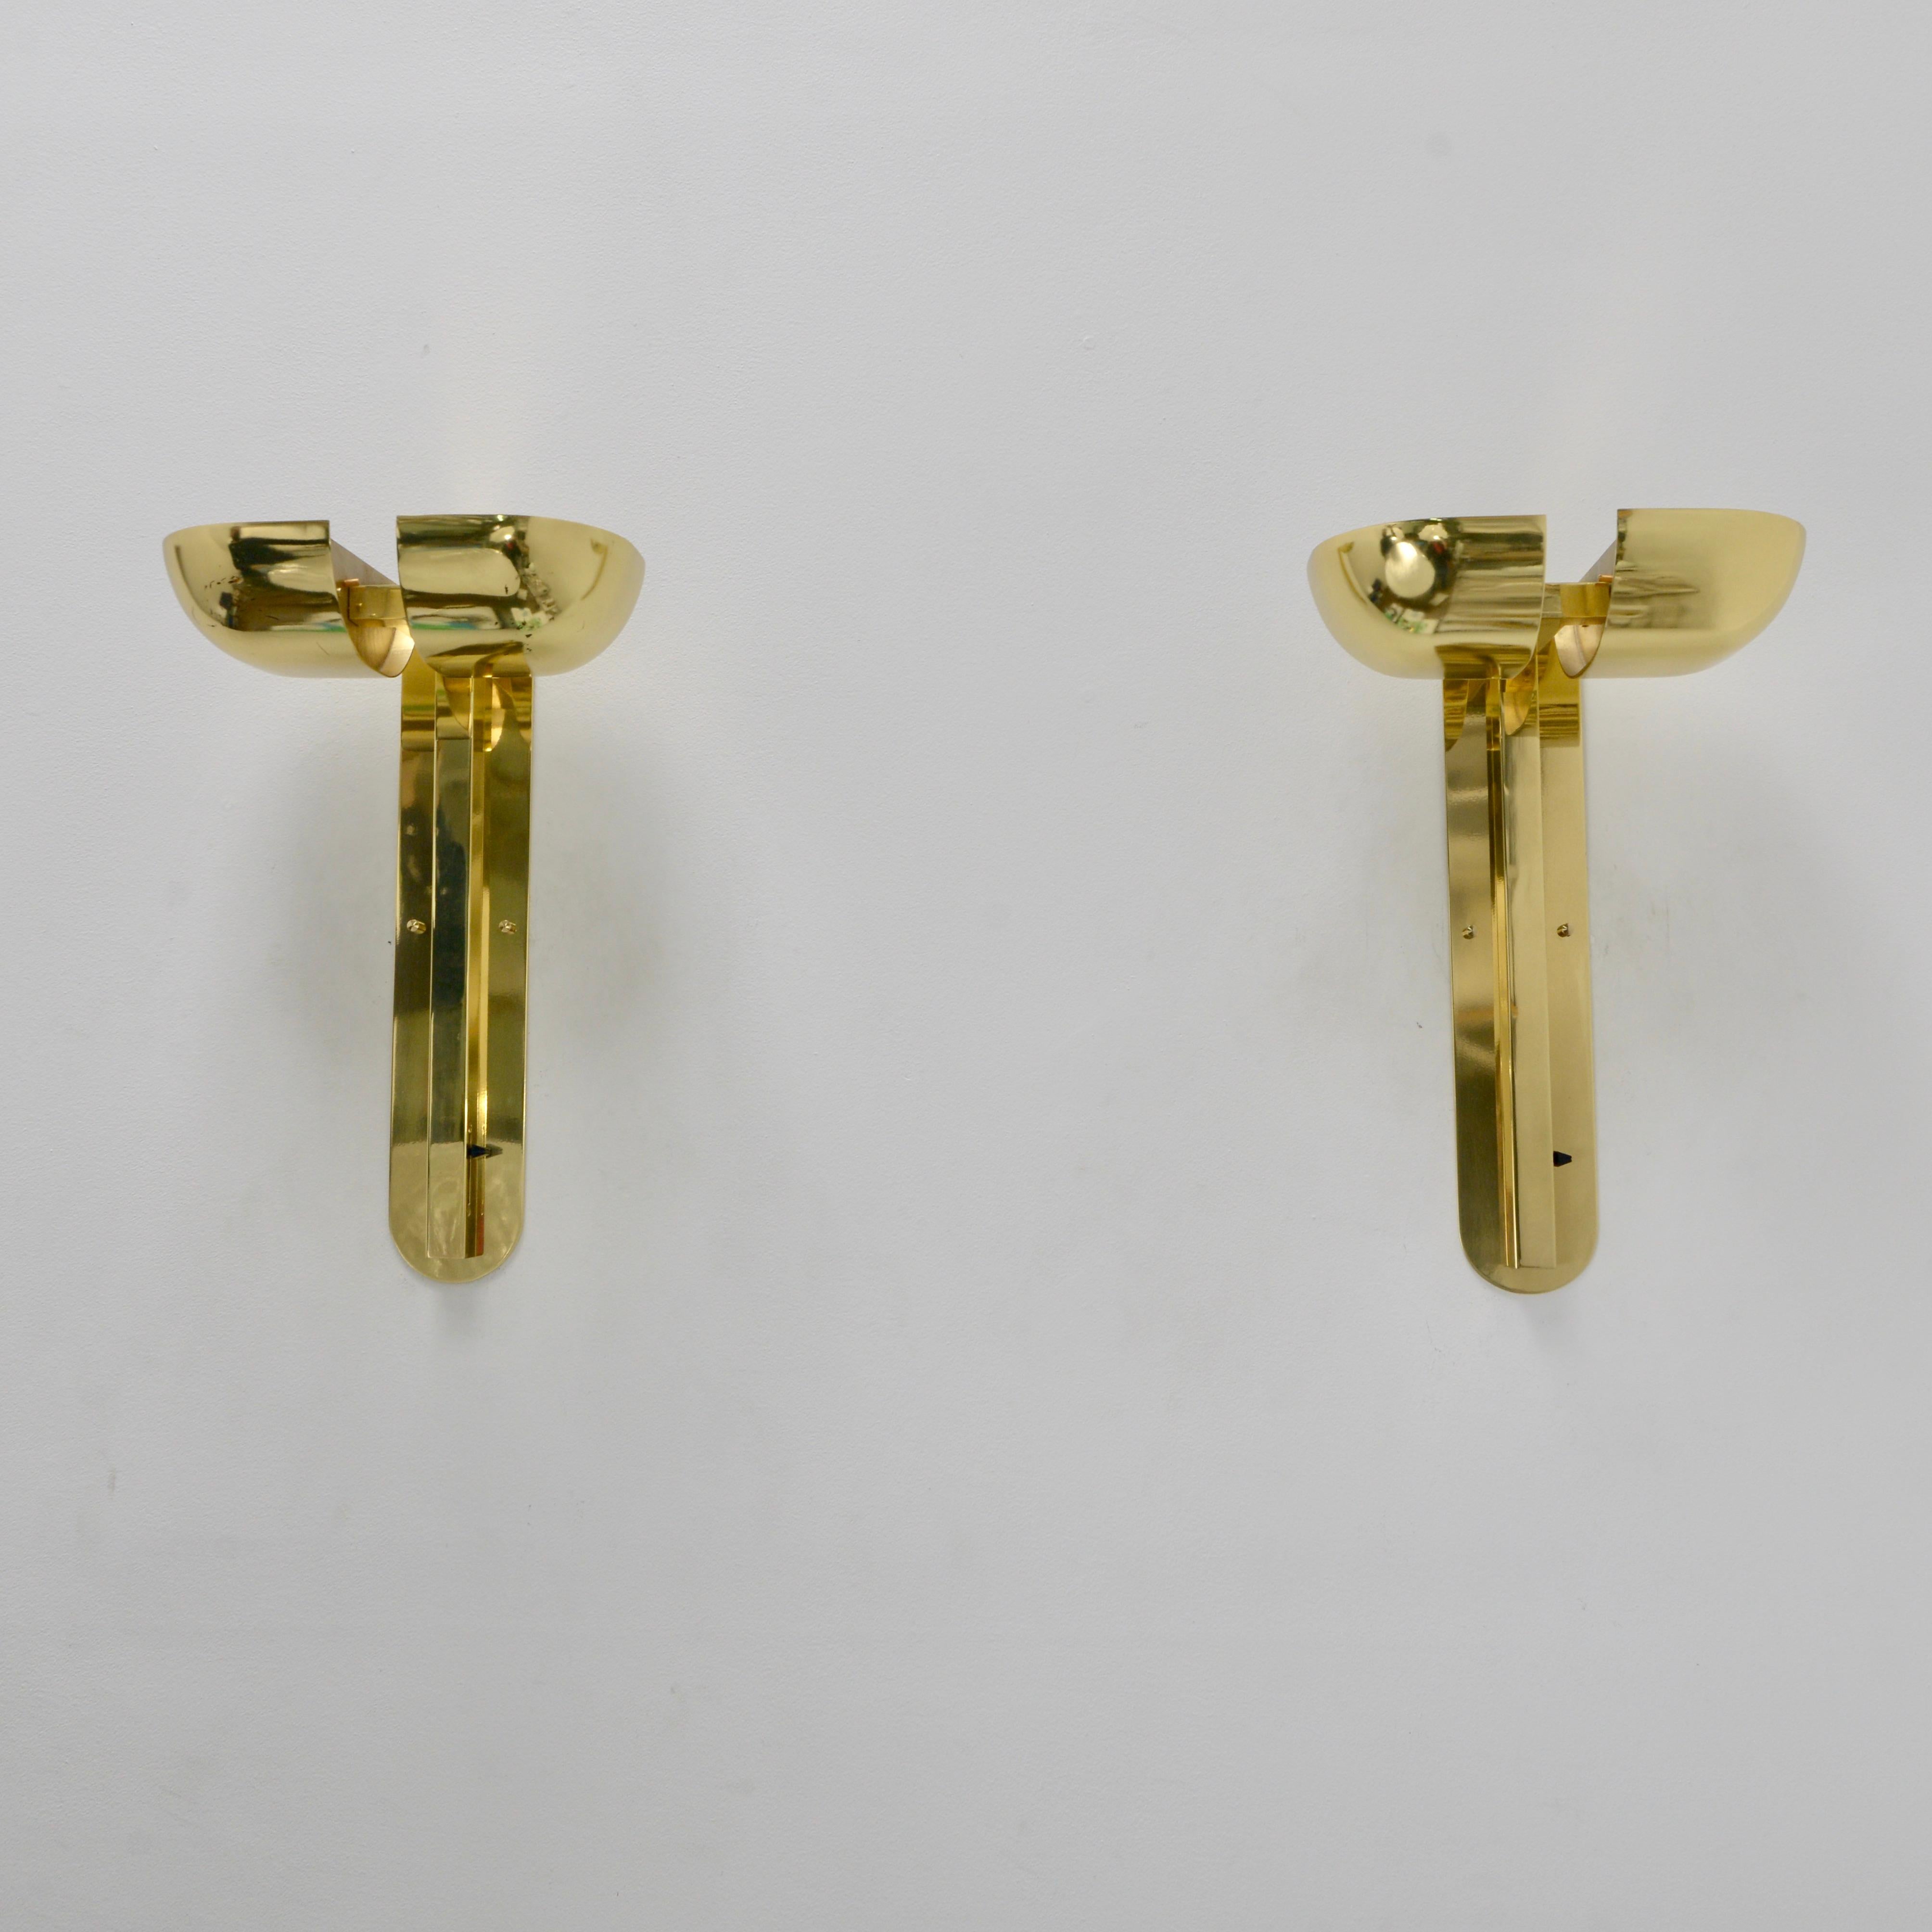 Large solid brass directional torchiere wall lamps by Lumi of Italy. Circa 1970s. Naturally aged with minimal wear. Partially restored. Each sconce has 2-E26 medium based light bulbs and a full range dimmer switch. The 2 shades per sconce are